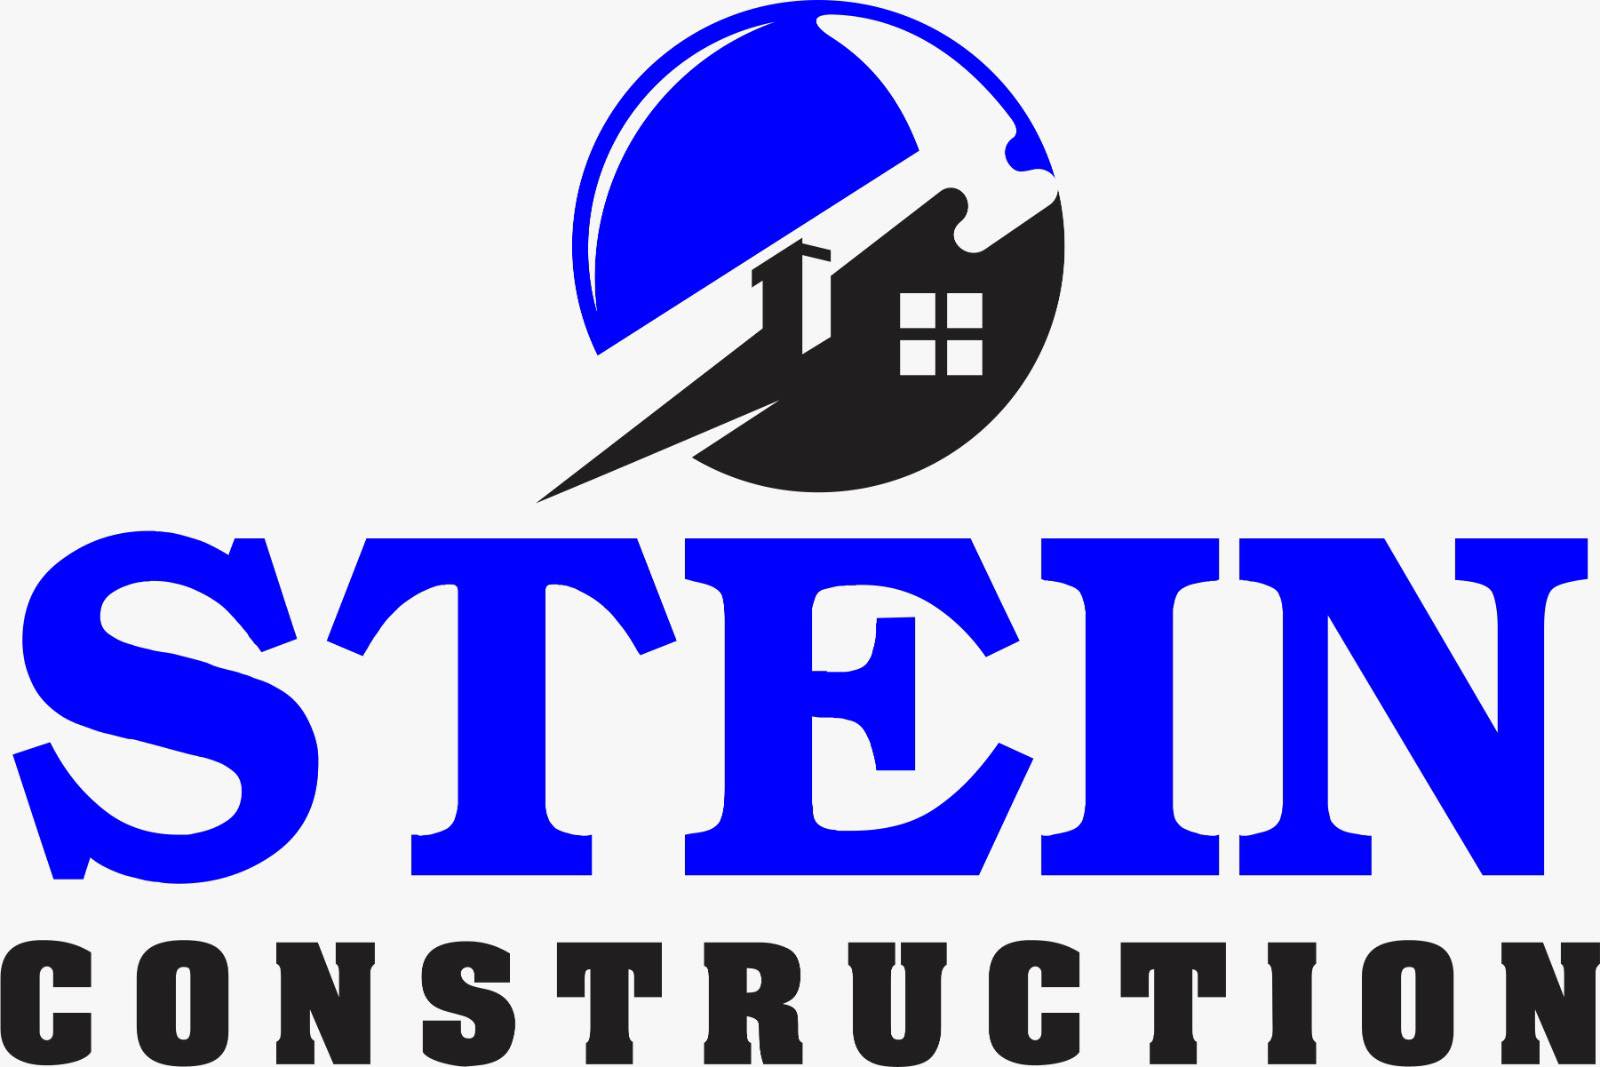 Stein Construction and Landscape Inc.